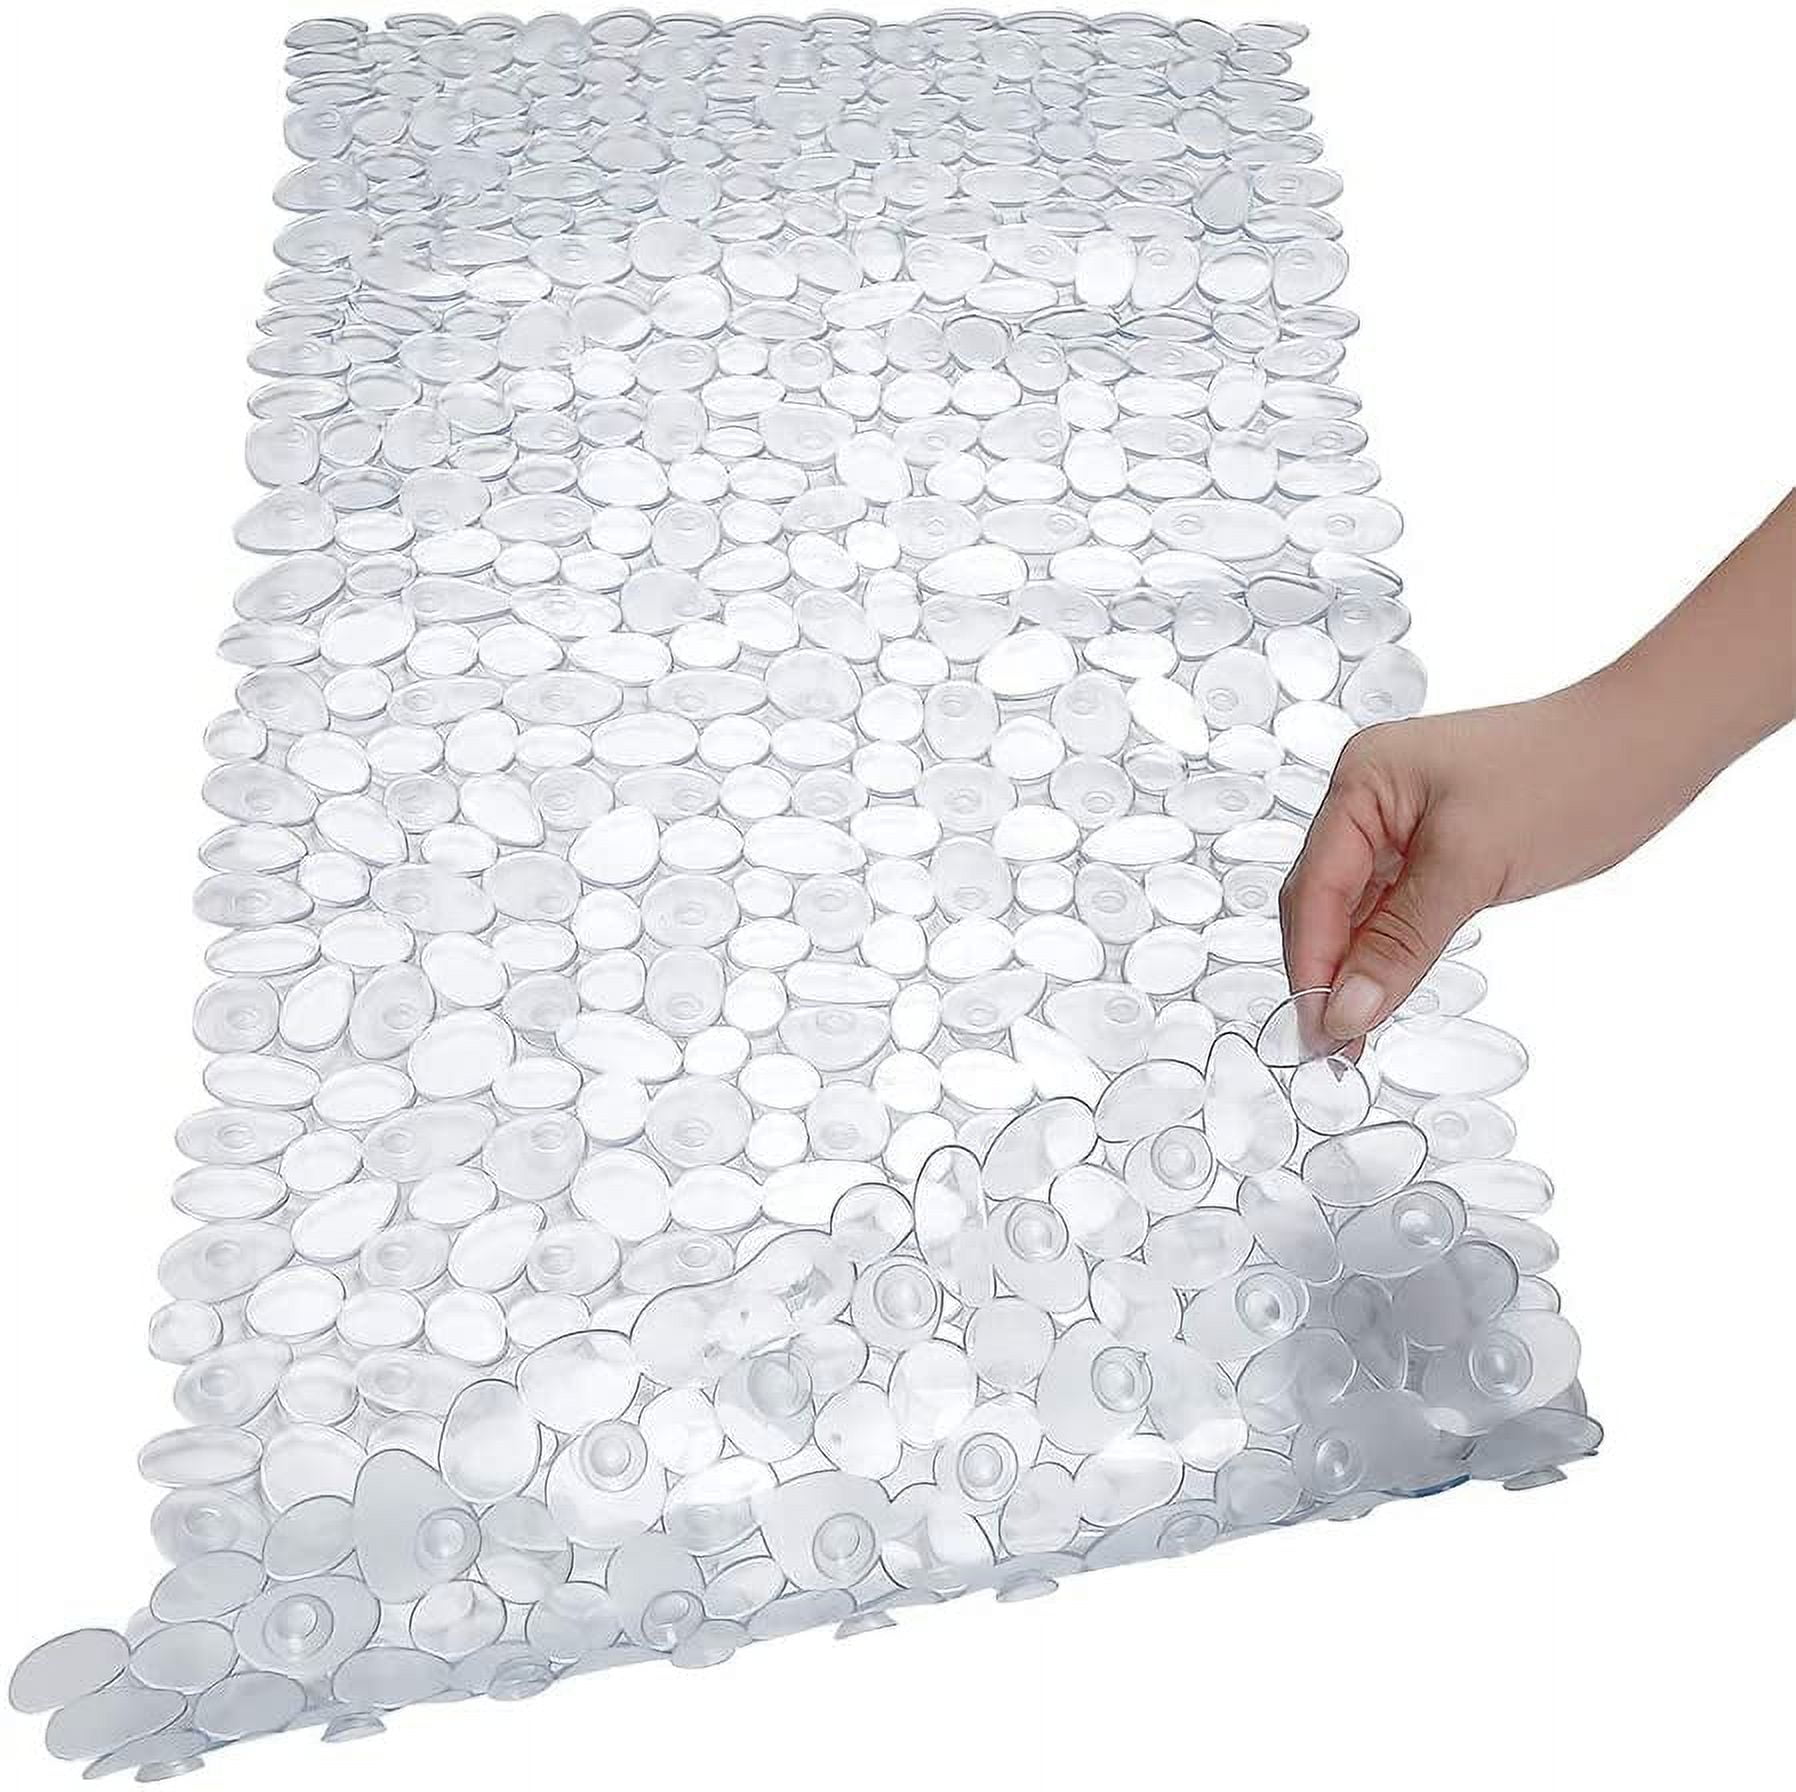 SlipX Solutions Bubble Bath Mat - Clear, 15 x 35 in - Fred Meyer